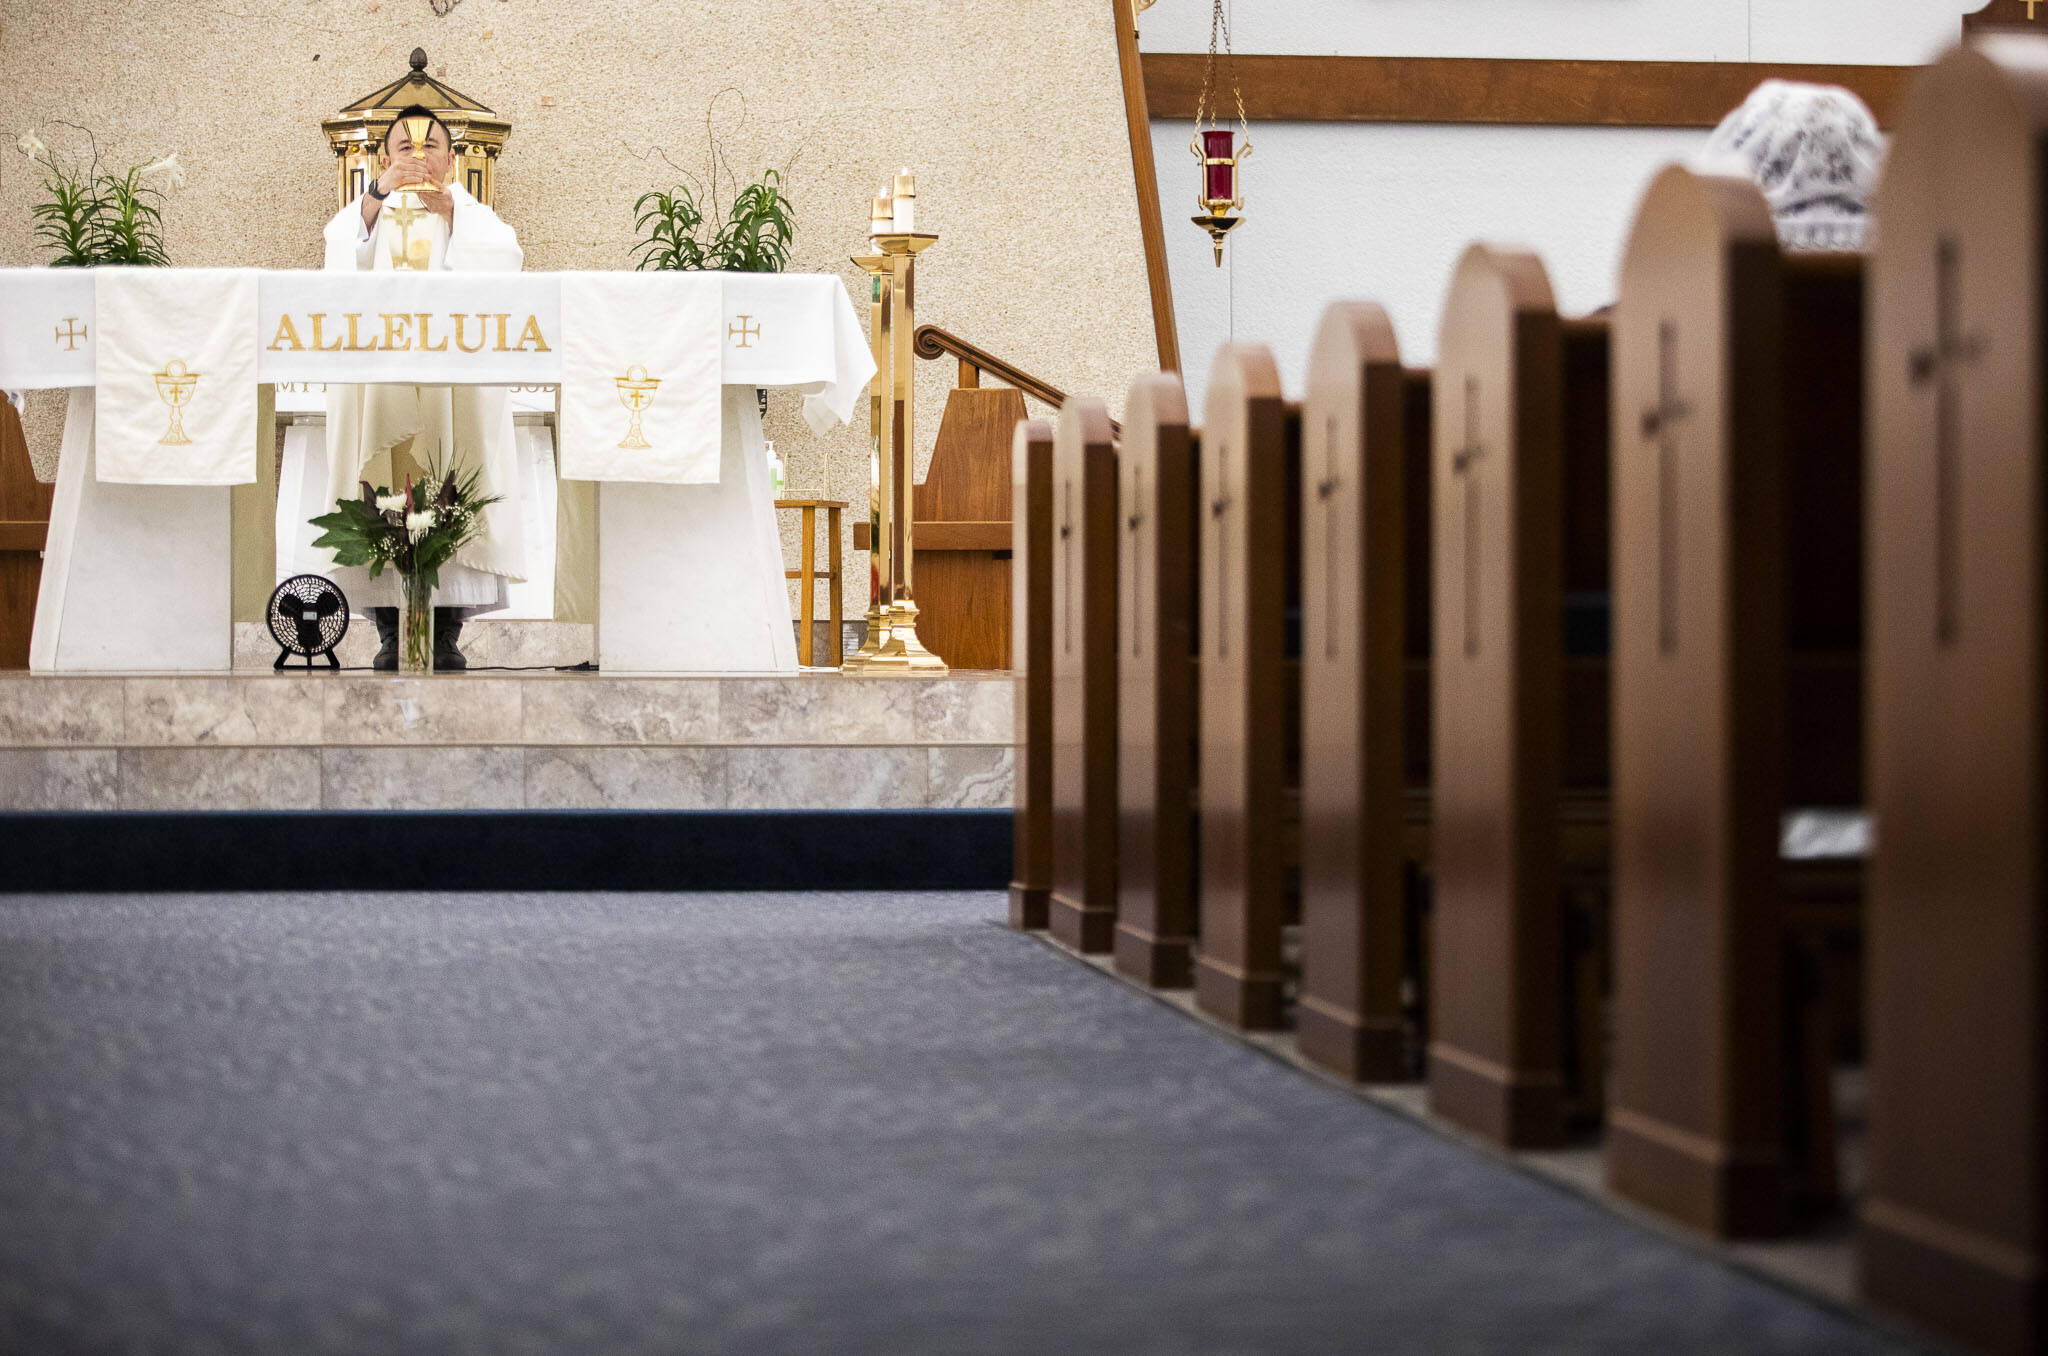 Father Tuan Nguyen holds morning mass at Immaculate Conception Church on Wednesday in Everett. It will become home to the new merged parish, Our Lady of Hope. (Olivia Vanni / The Herald)